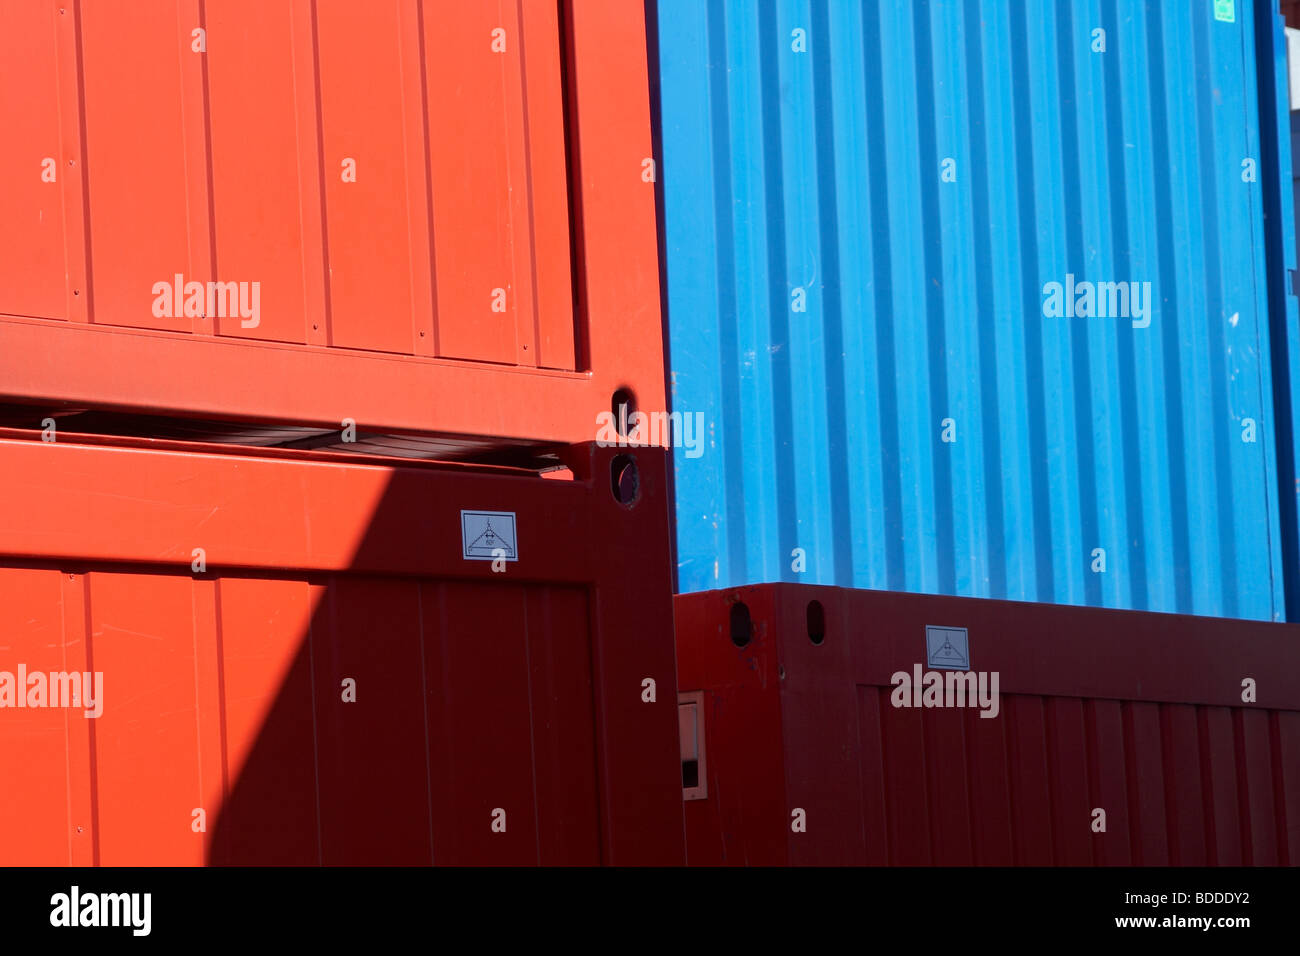 containers Stock Photo